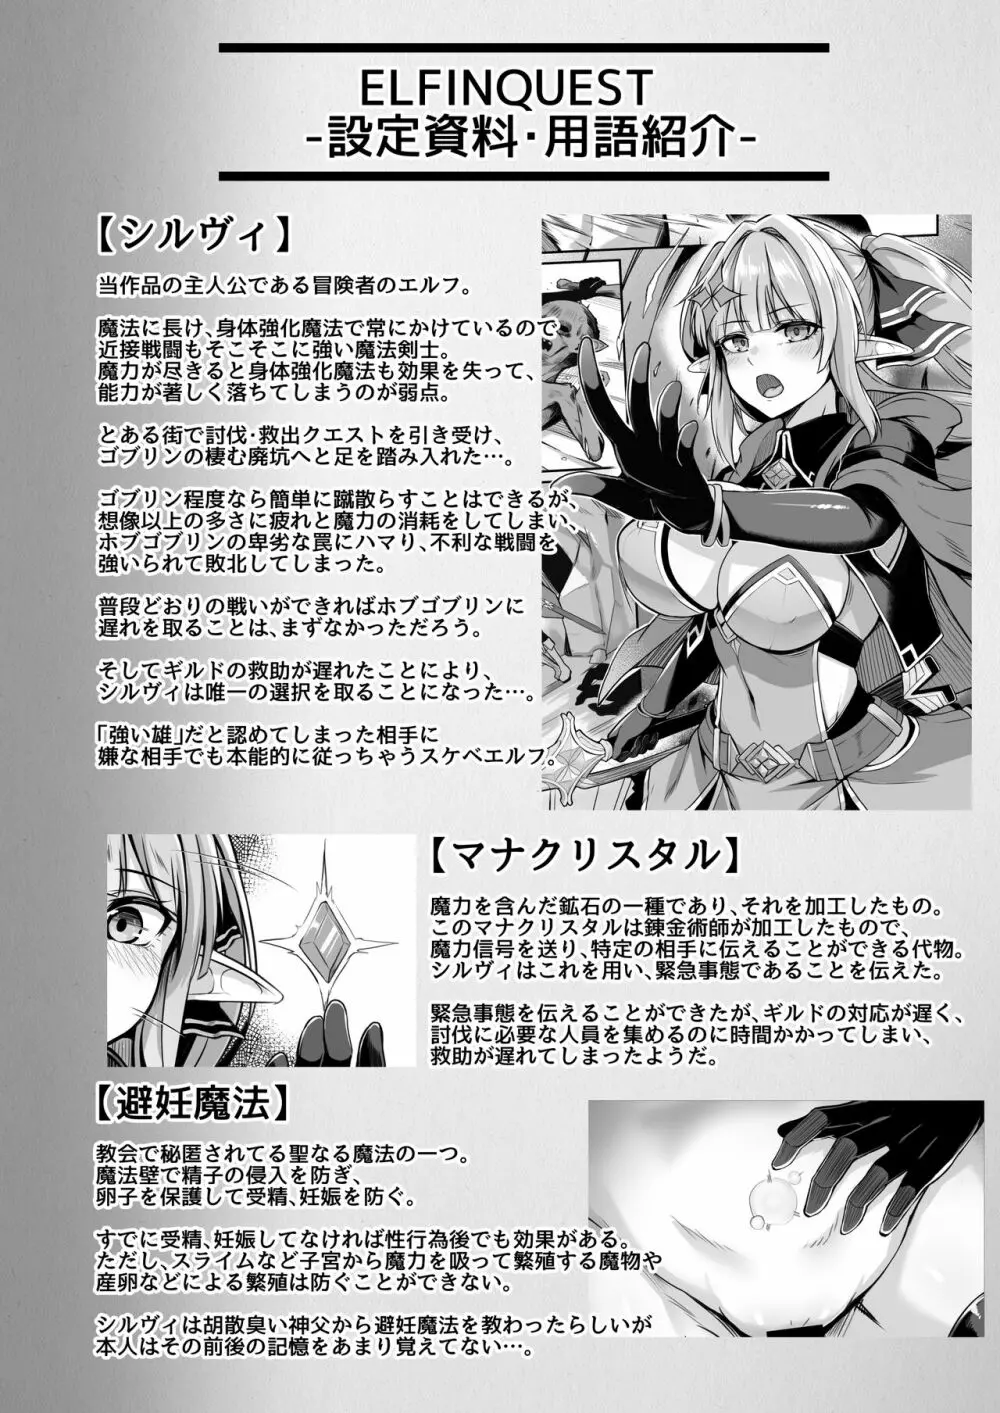 ELFIN QUEST #ゴブリン敗北編 Page.35